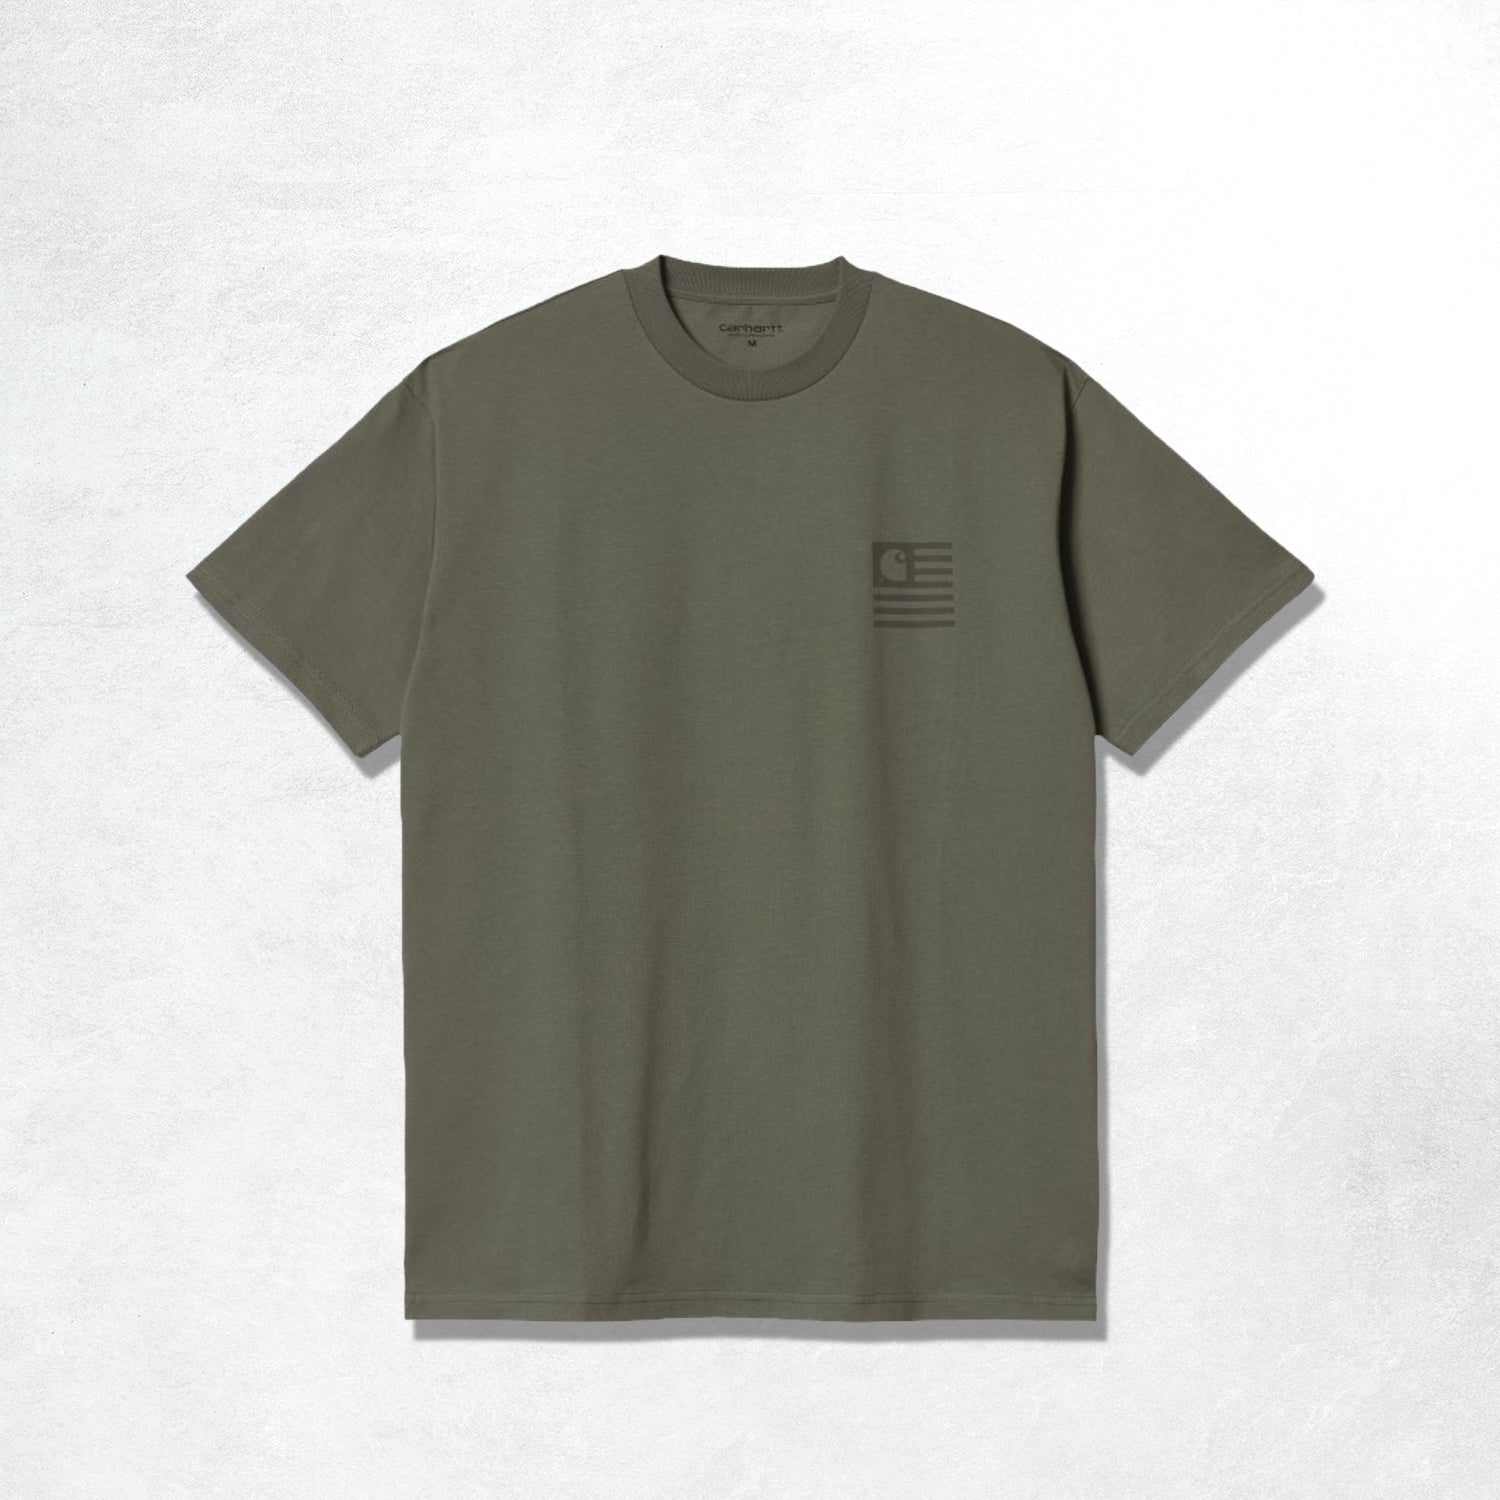 Carhartt WIP S/S Medley State T-Shirt: Thyme (Front)